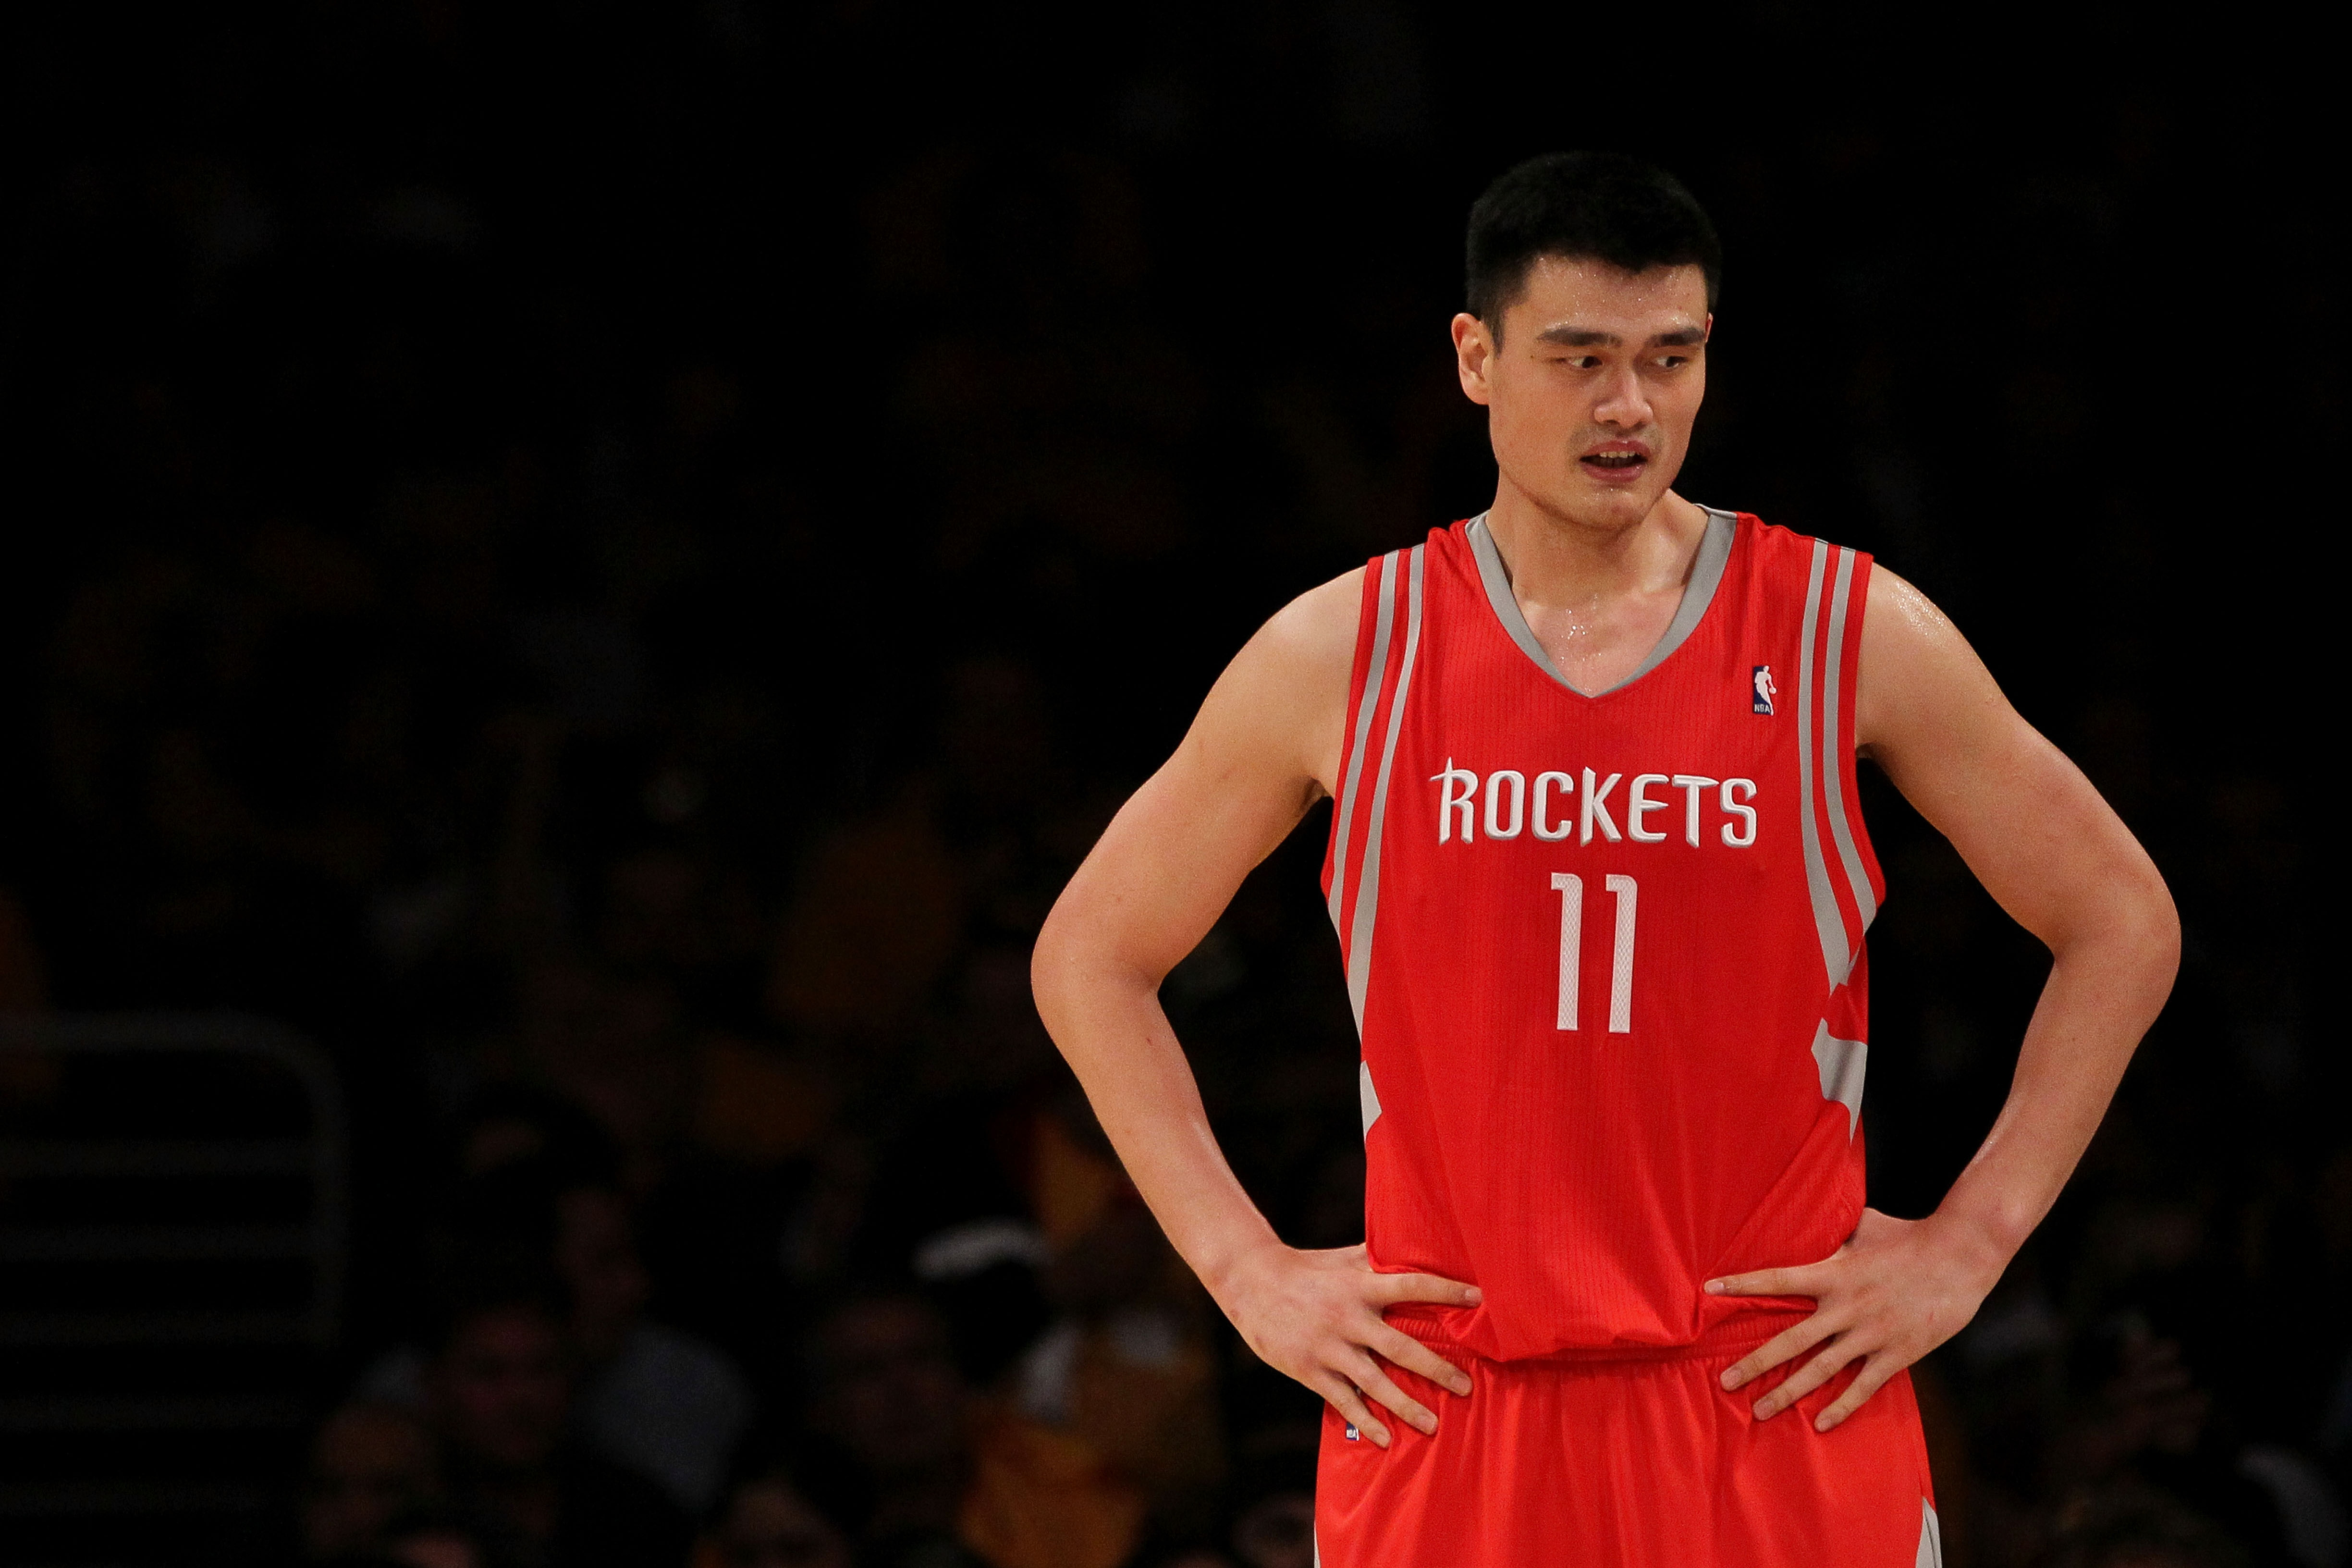 LOS ANGELES, CA - OCTOBER 26:  Yao Ming #11 of the Houston Rockets looks on during their opening night game against the Los Angeles Lakers at Staples Center on October 26, 2010 in Los Angeles, California. NOTE TO USER: User expressly acknowledges and agre